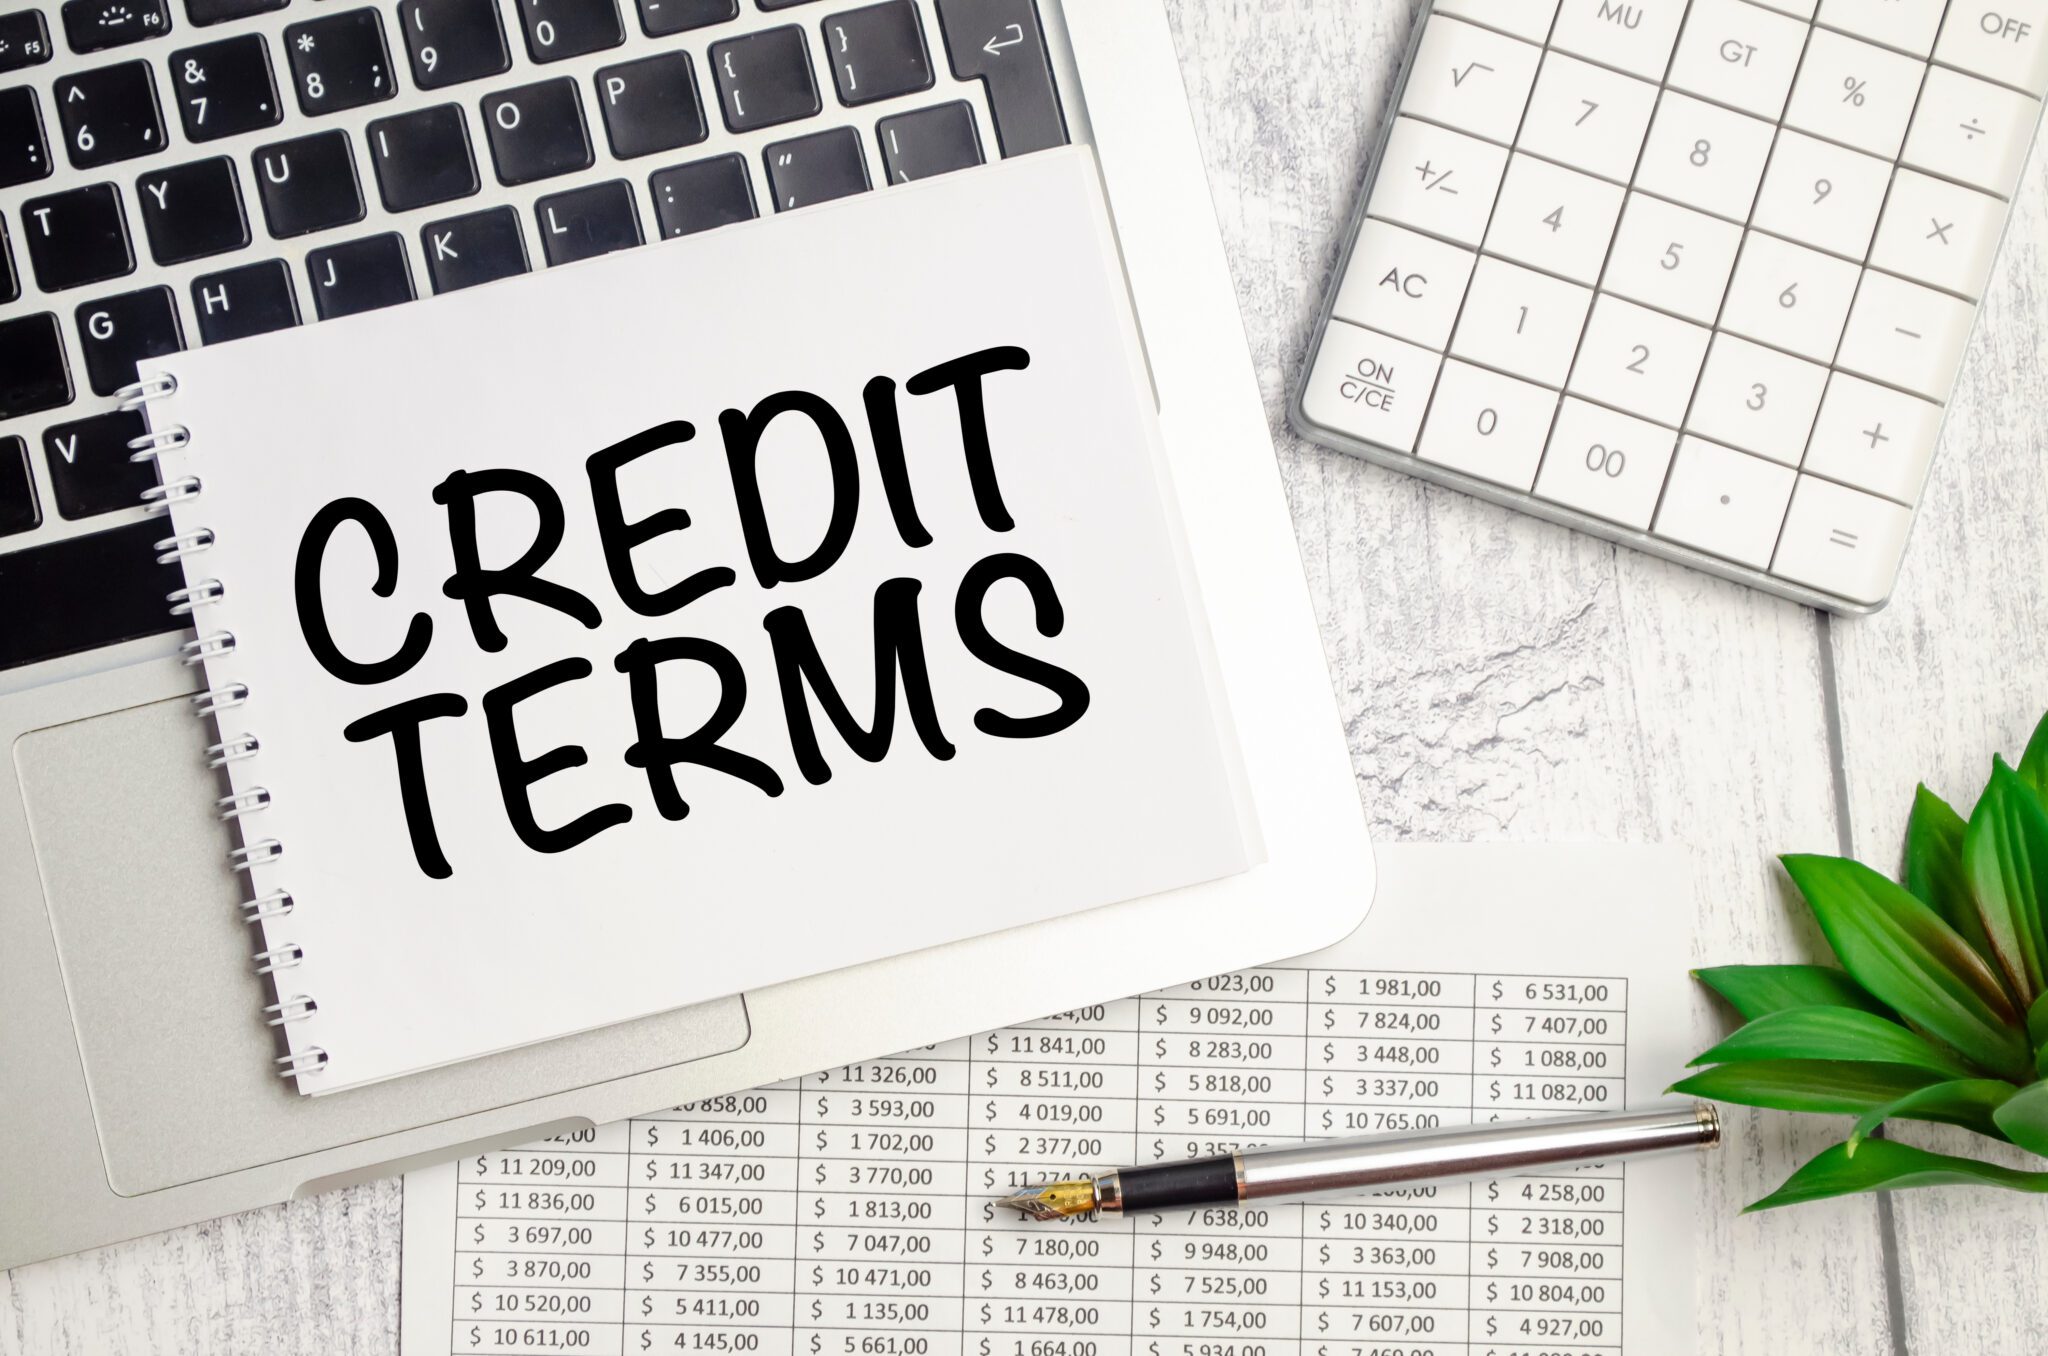 Credit terms through A/R Financing